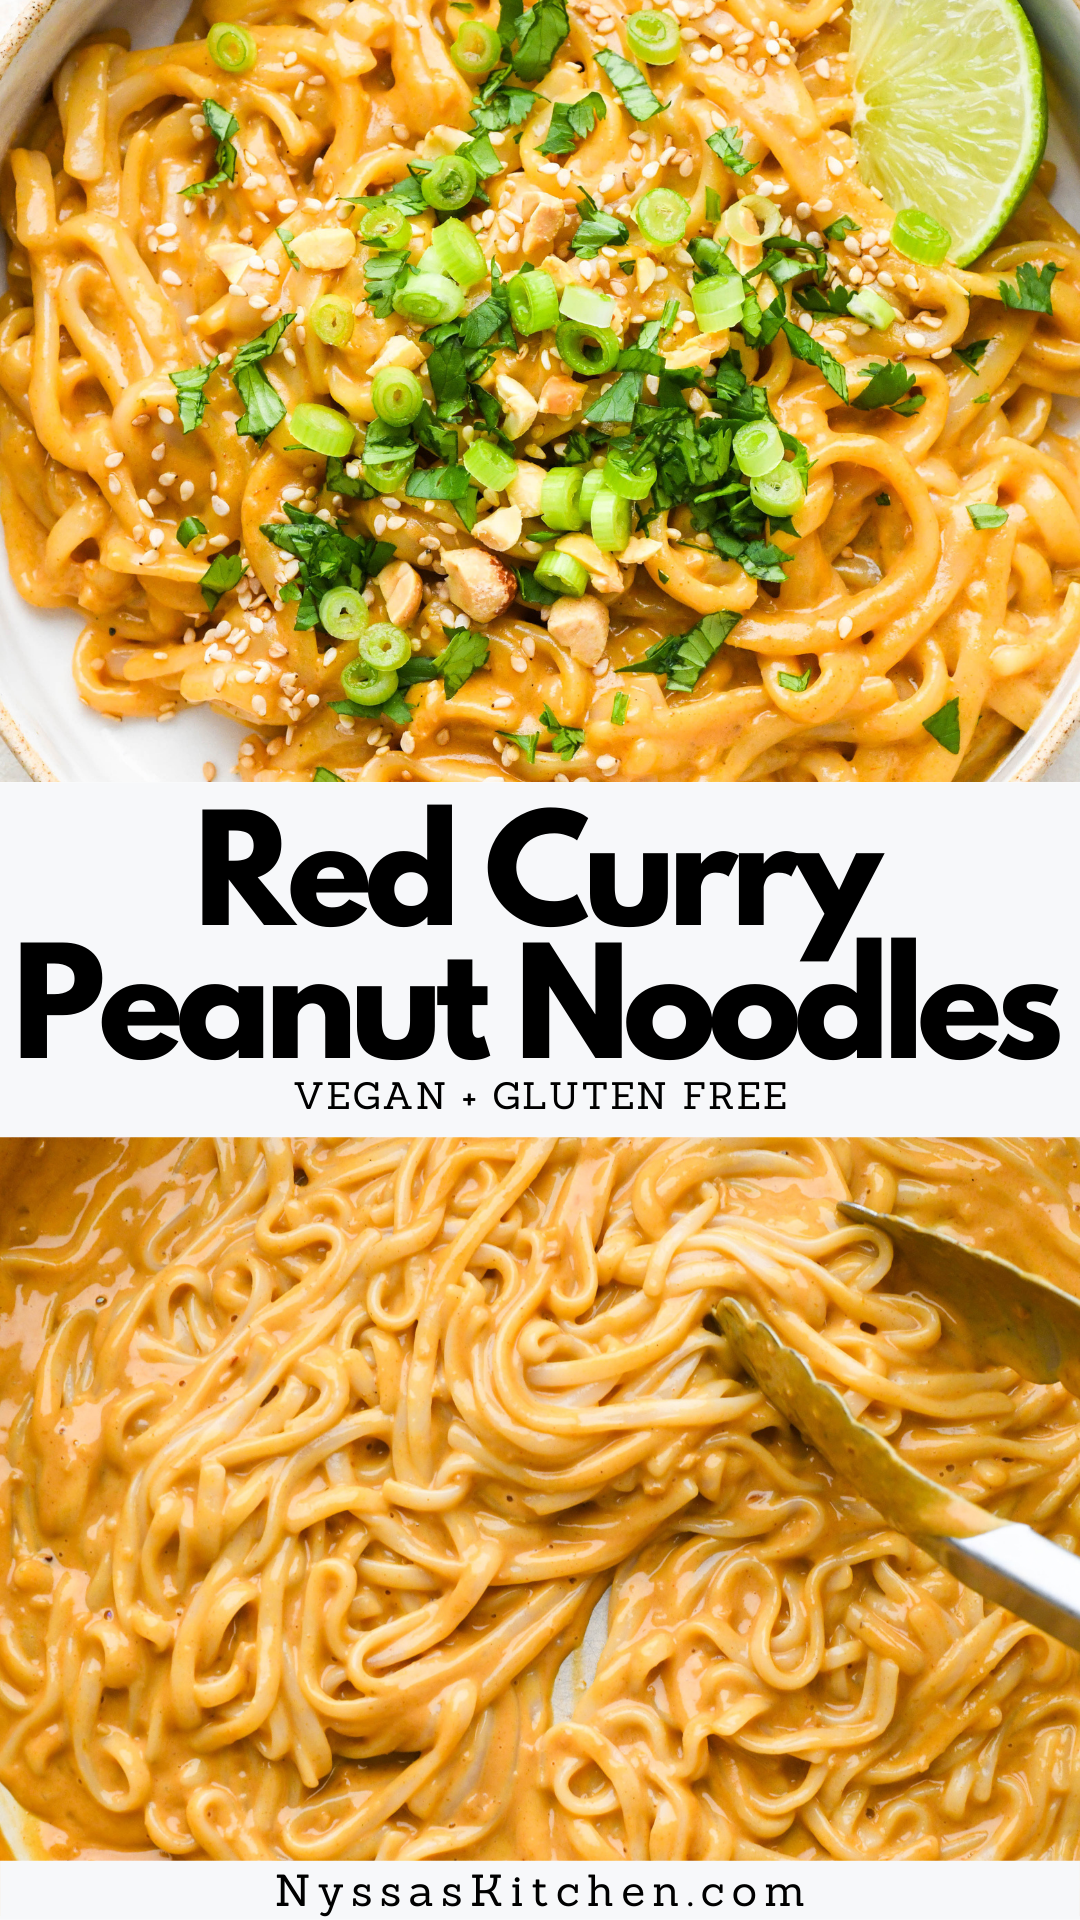 These red curry peanut noodles are a satisfying Thai inspired dish that is so versatile and delicious! Made with gluten free rice noodles, red curry paste, coconut milk, and peanut butter, and ready in less than 30 minutes. Vegan, gluten free, and dairy free.